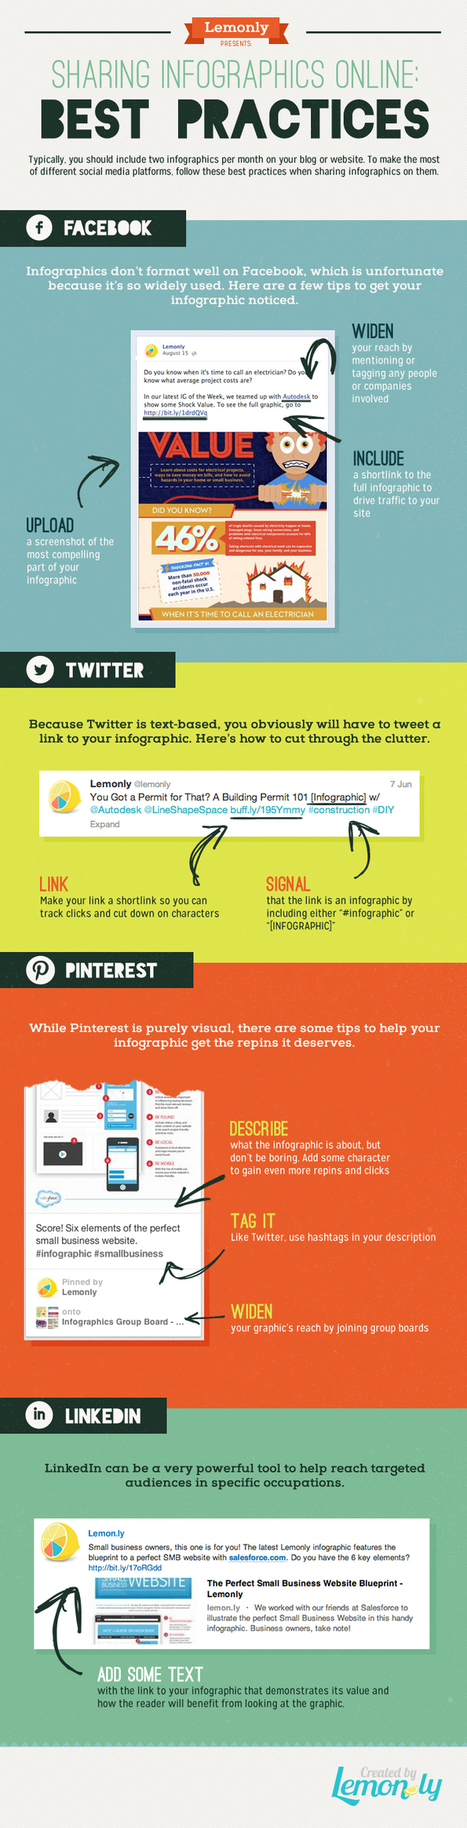 Social Media Best Practices for Infographics | E-Learning-Inclusivo (Mashup) | Scoop.it